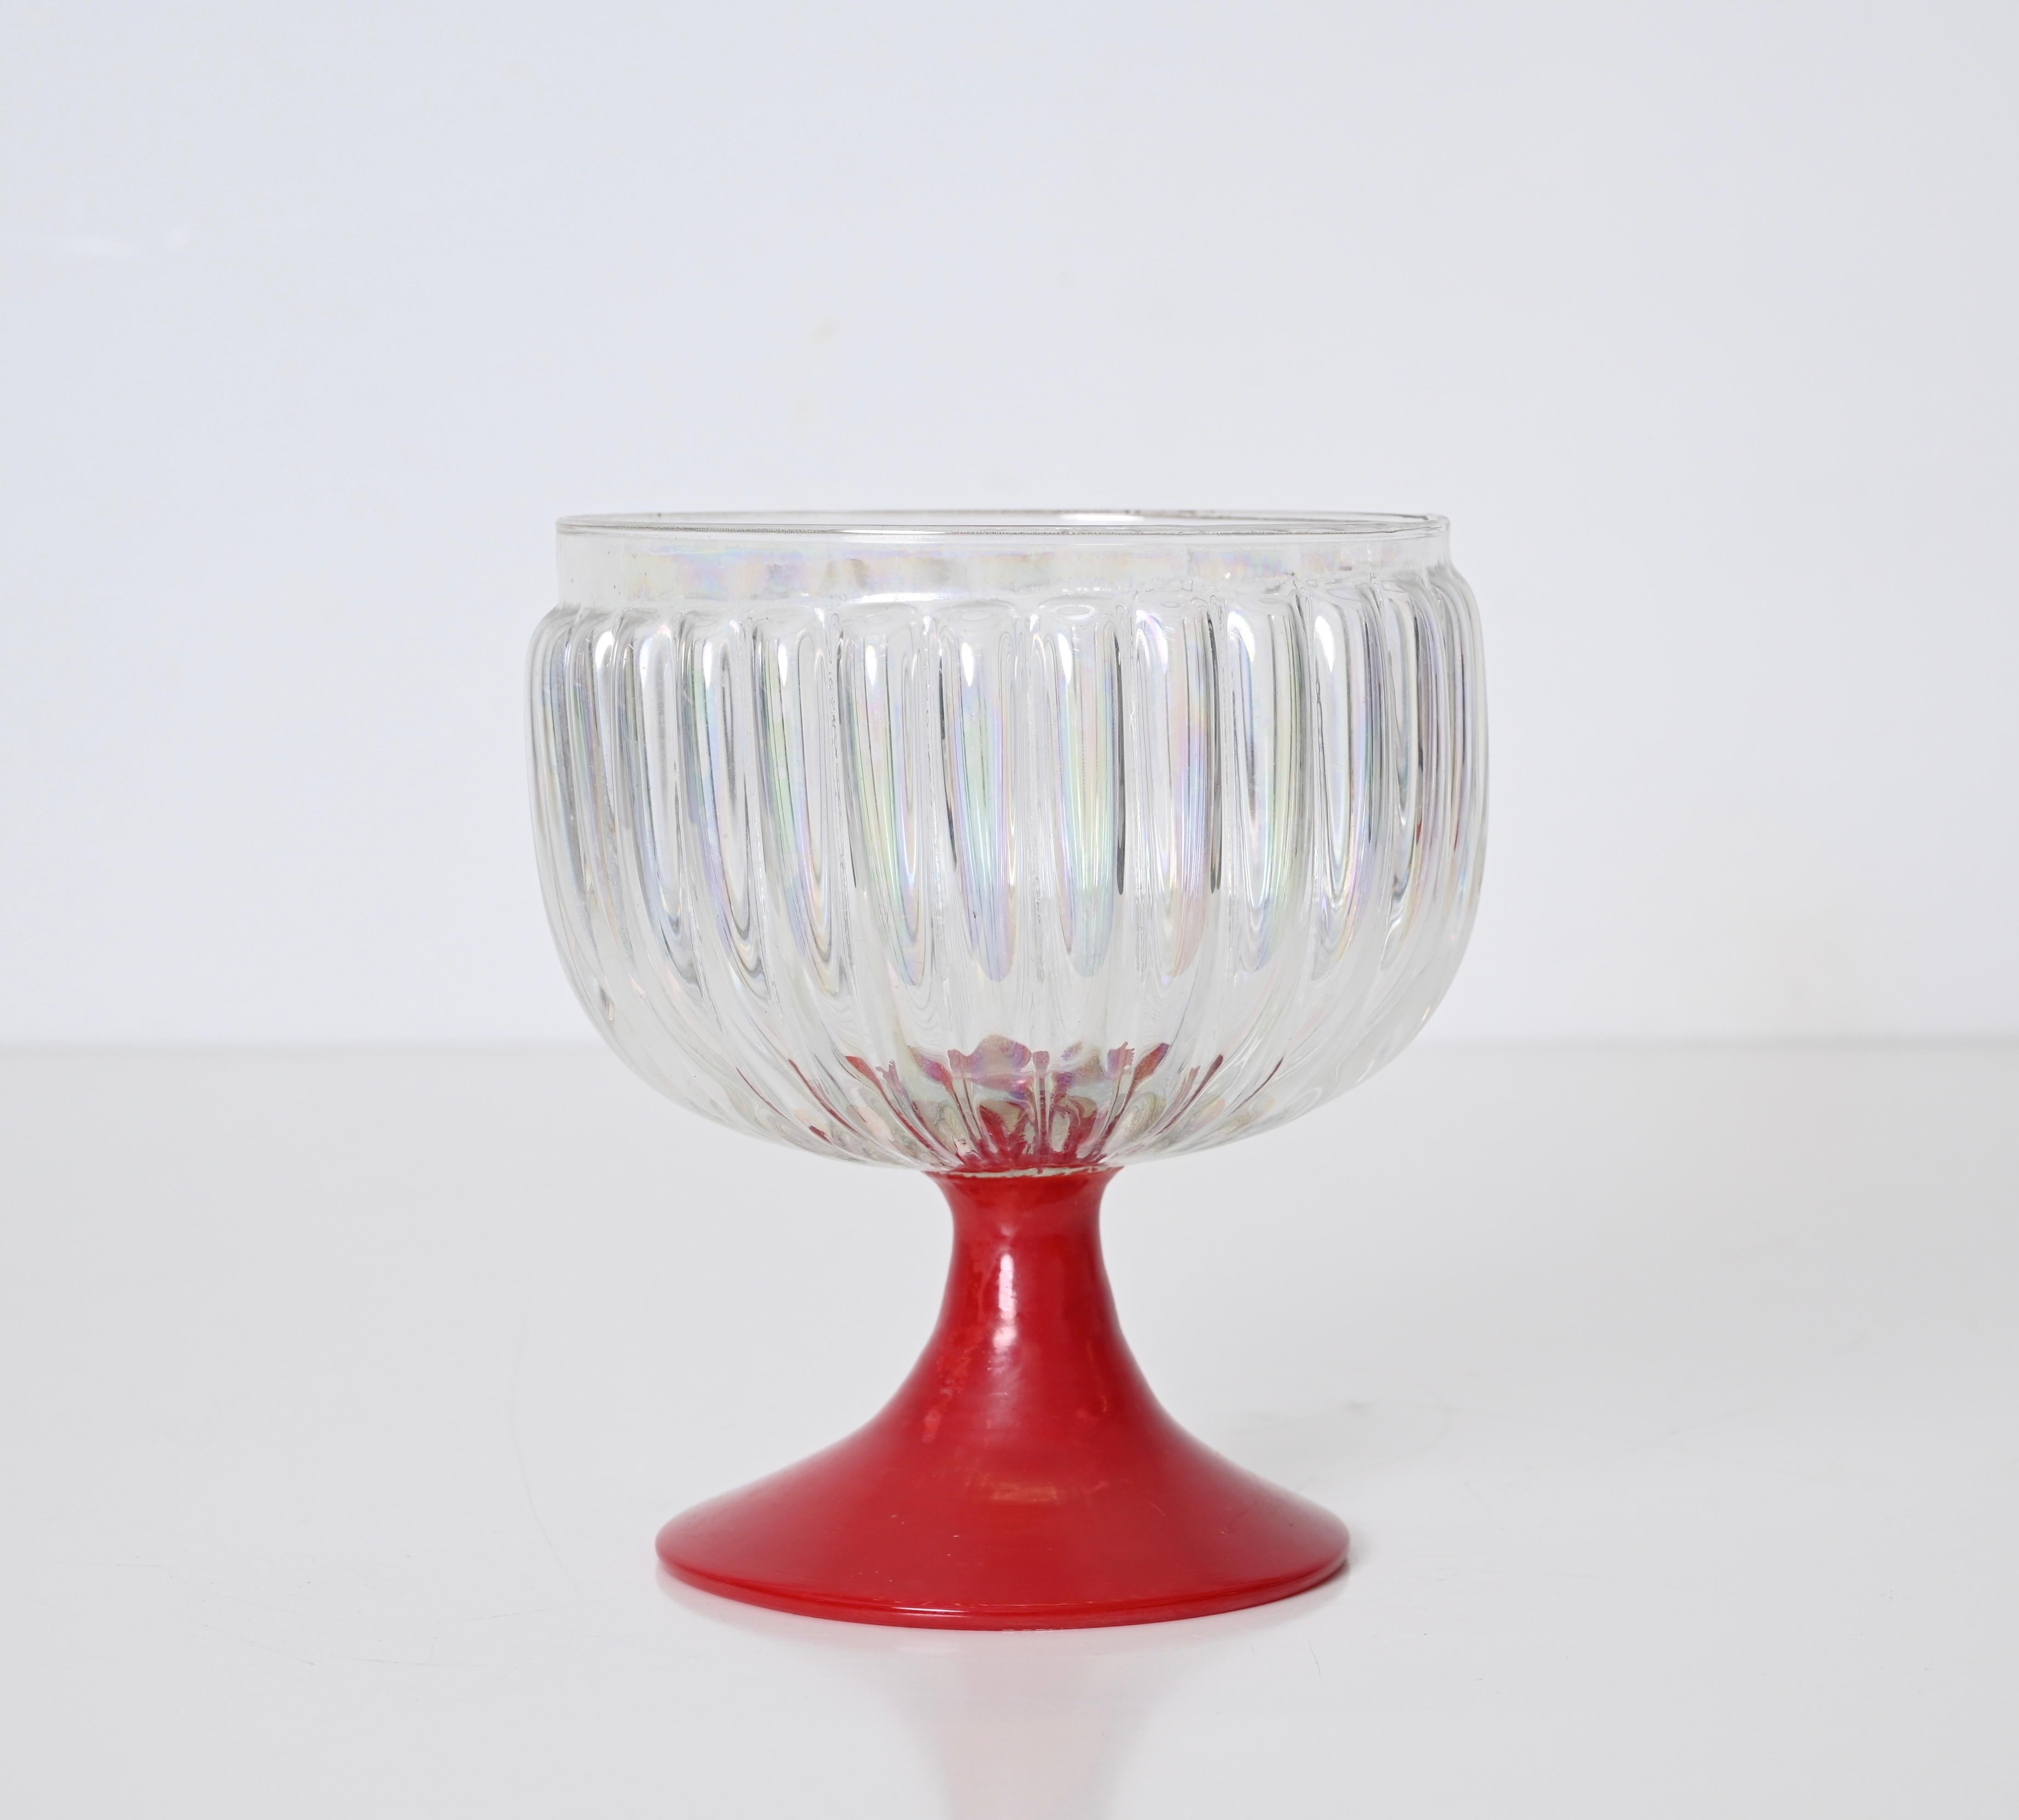 Art Deco Pair of Large Decorative Murano Red and Iridescent Goblet Glasses, Italy 1940s For Sale